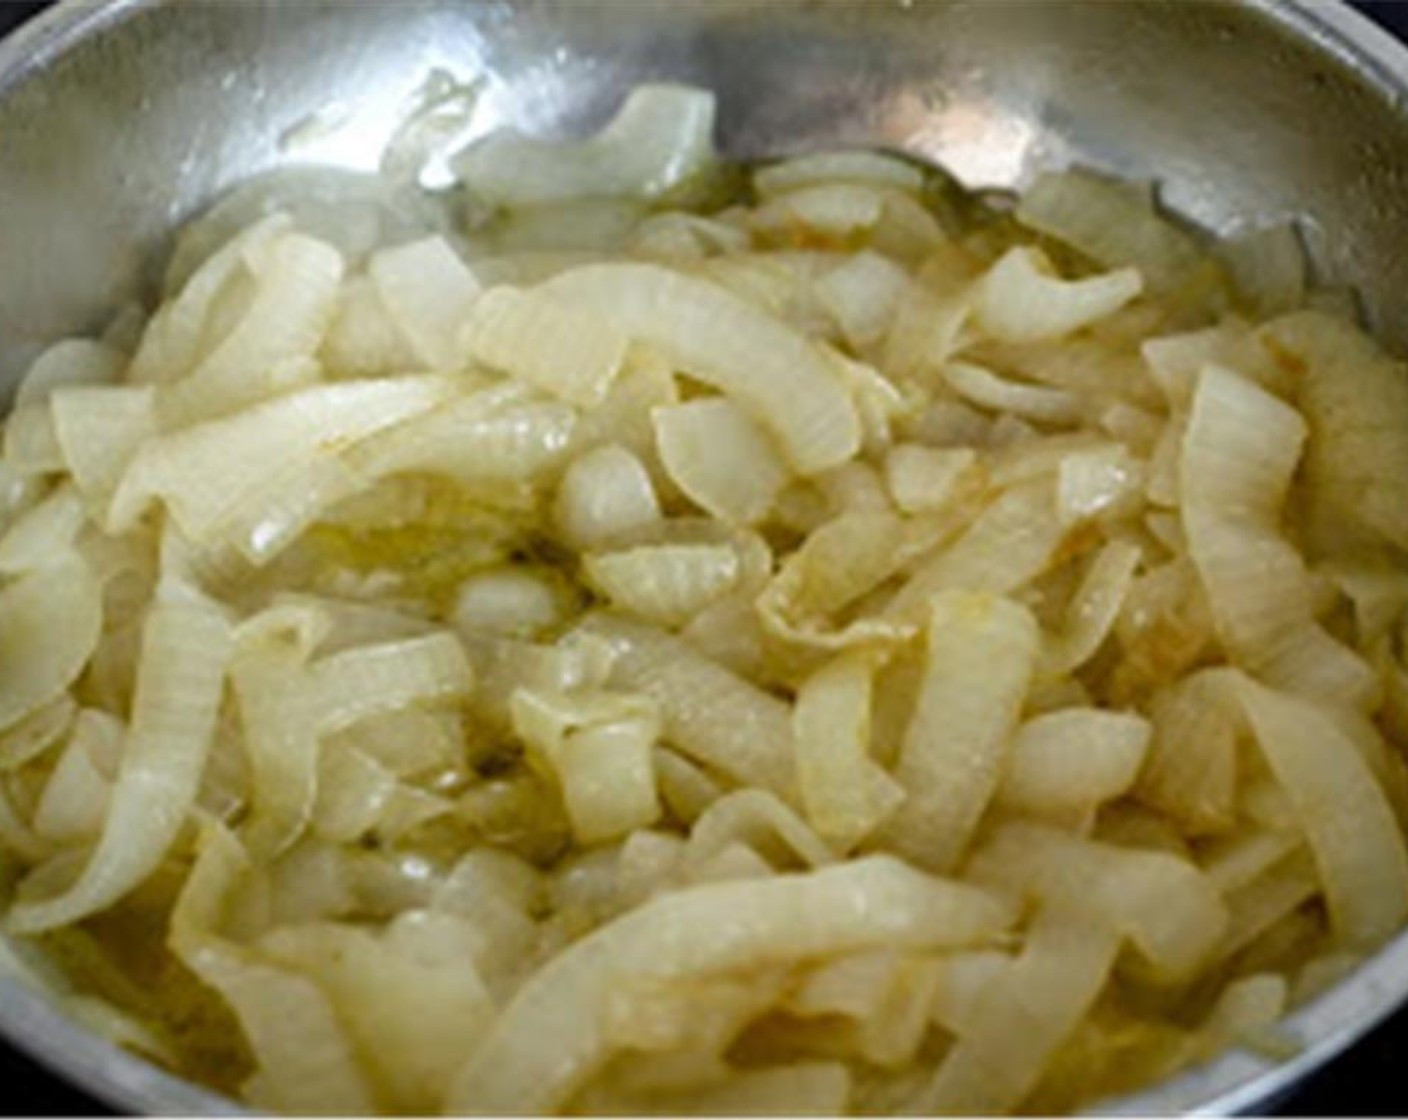 step 3 If you want to make the caramelised onion, heat the Olive Oil (1/3 cup) in a saucepan on medium high heat. Add in Yellow Onions (2) and leave for about 2 minutes.